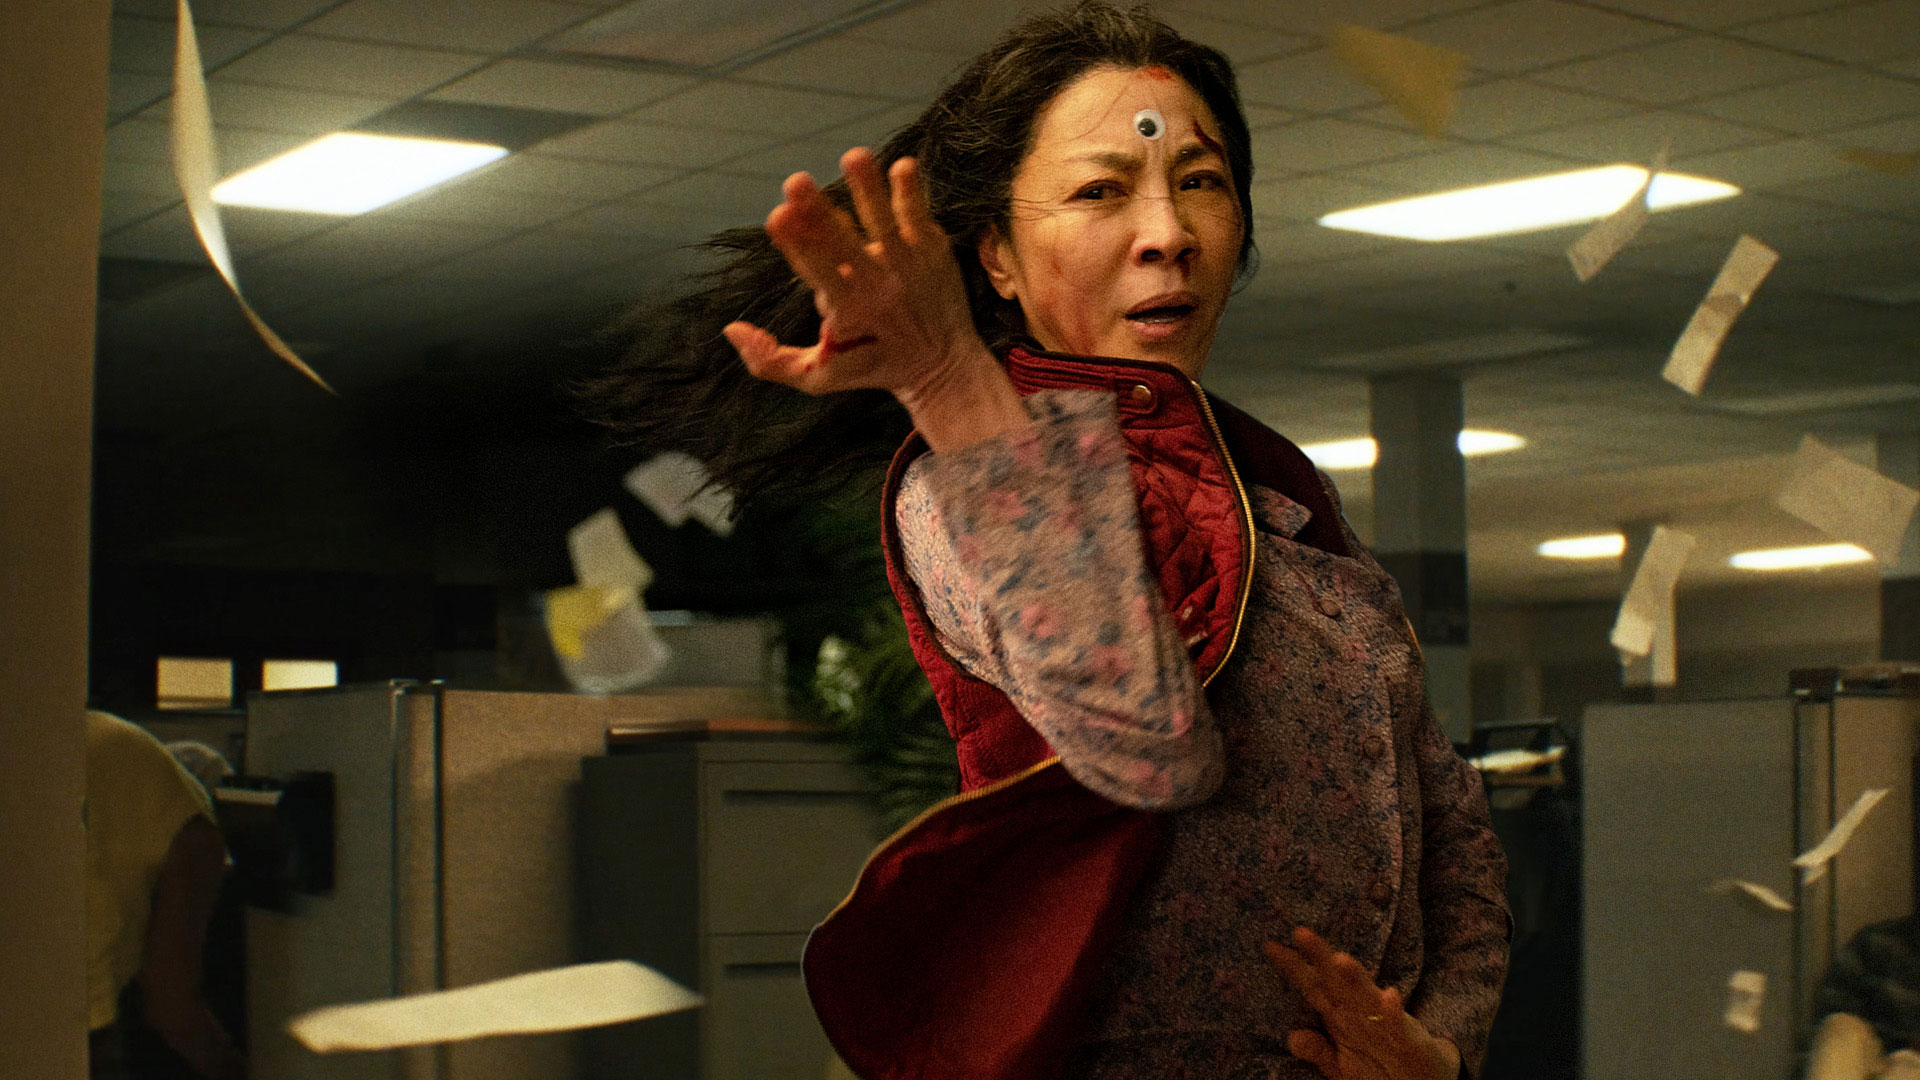 Michelle Yeoh as Evelyn Quan Wang in "Everything Everywhere All at Once." MUST CREDIT: A24 photo